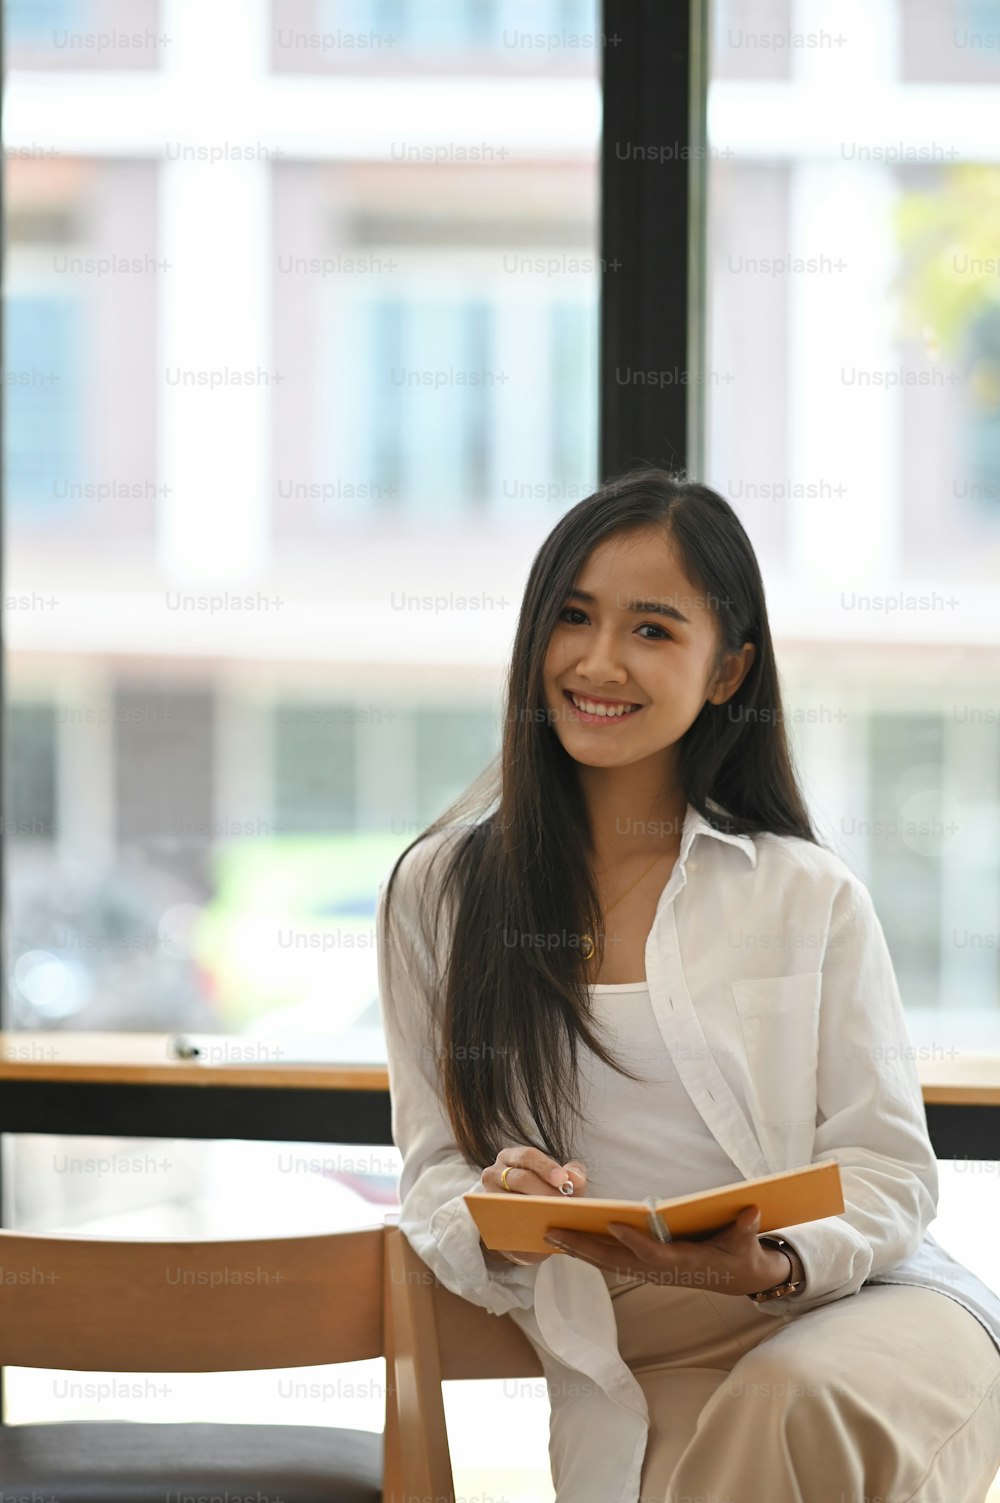 Smiling beautiful woman in white shirt holding a notebook in her hands while sitting at the modern counter bar in coffee cafe with glass wall as background.